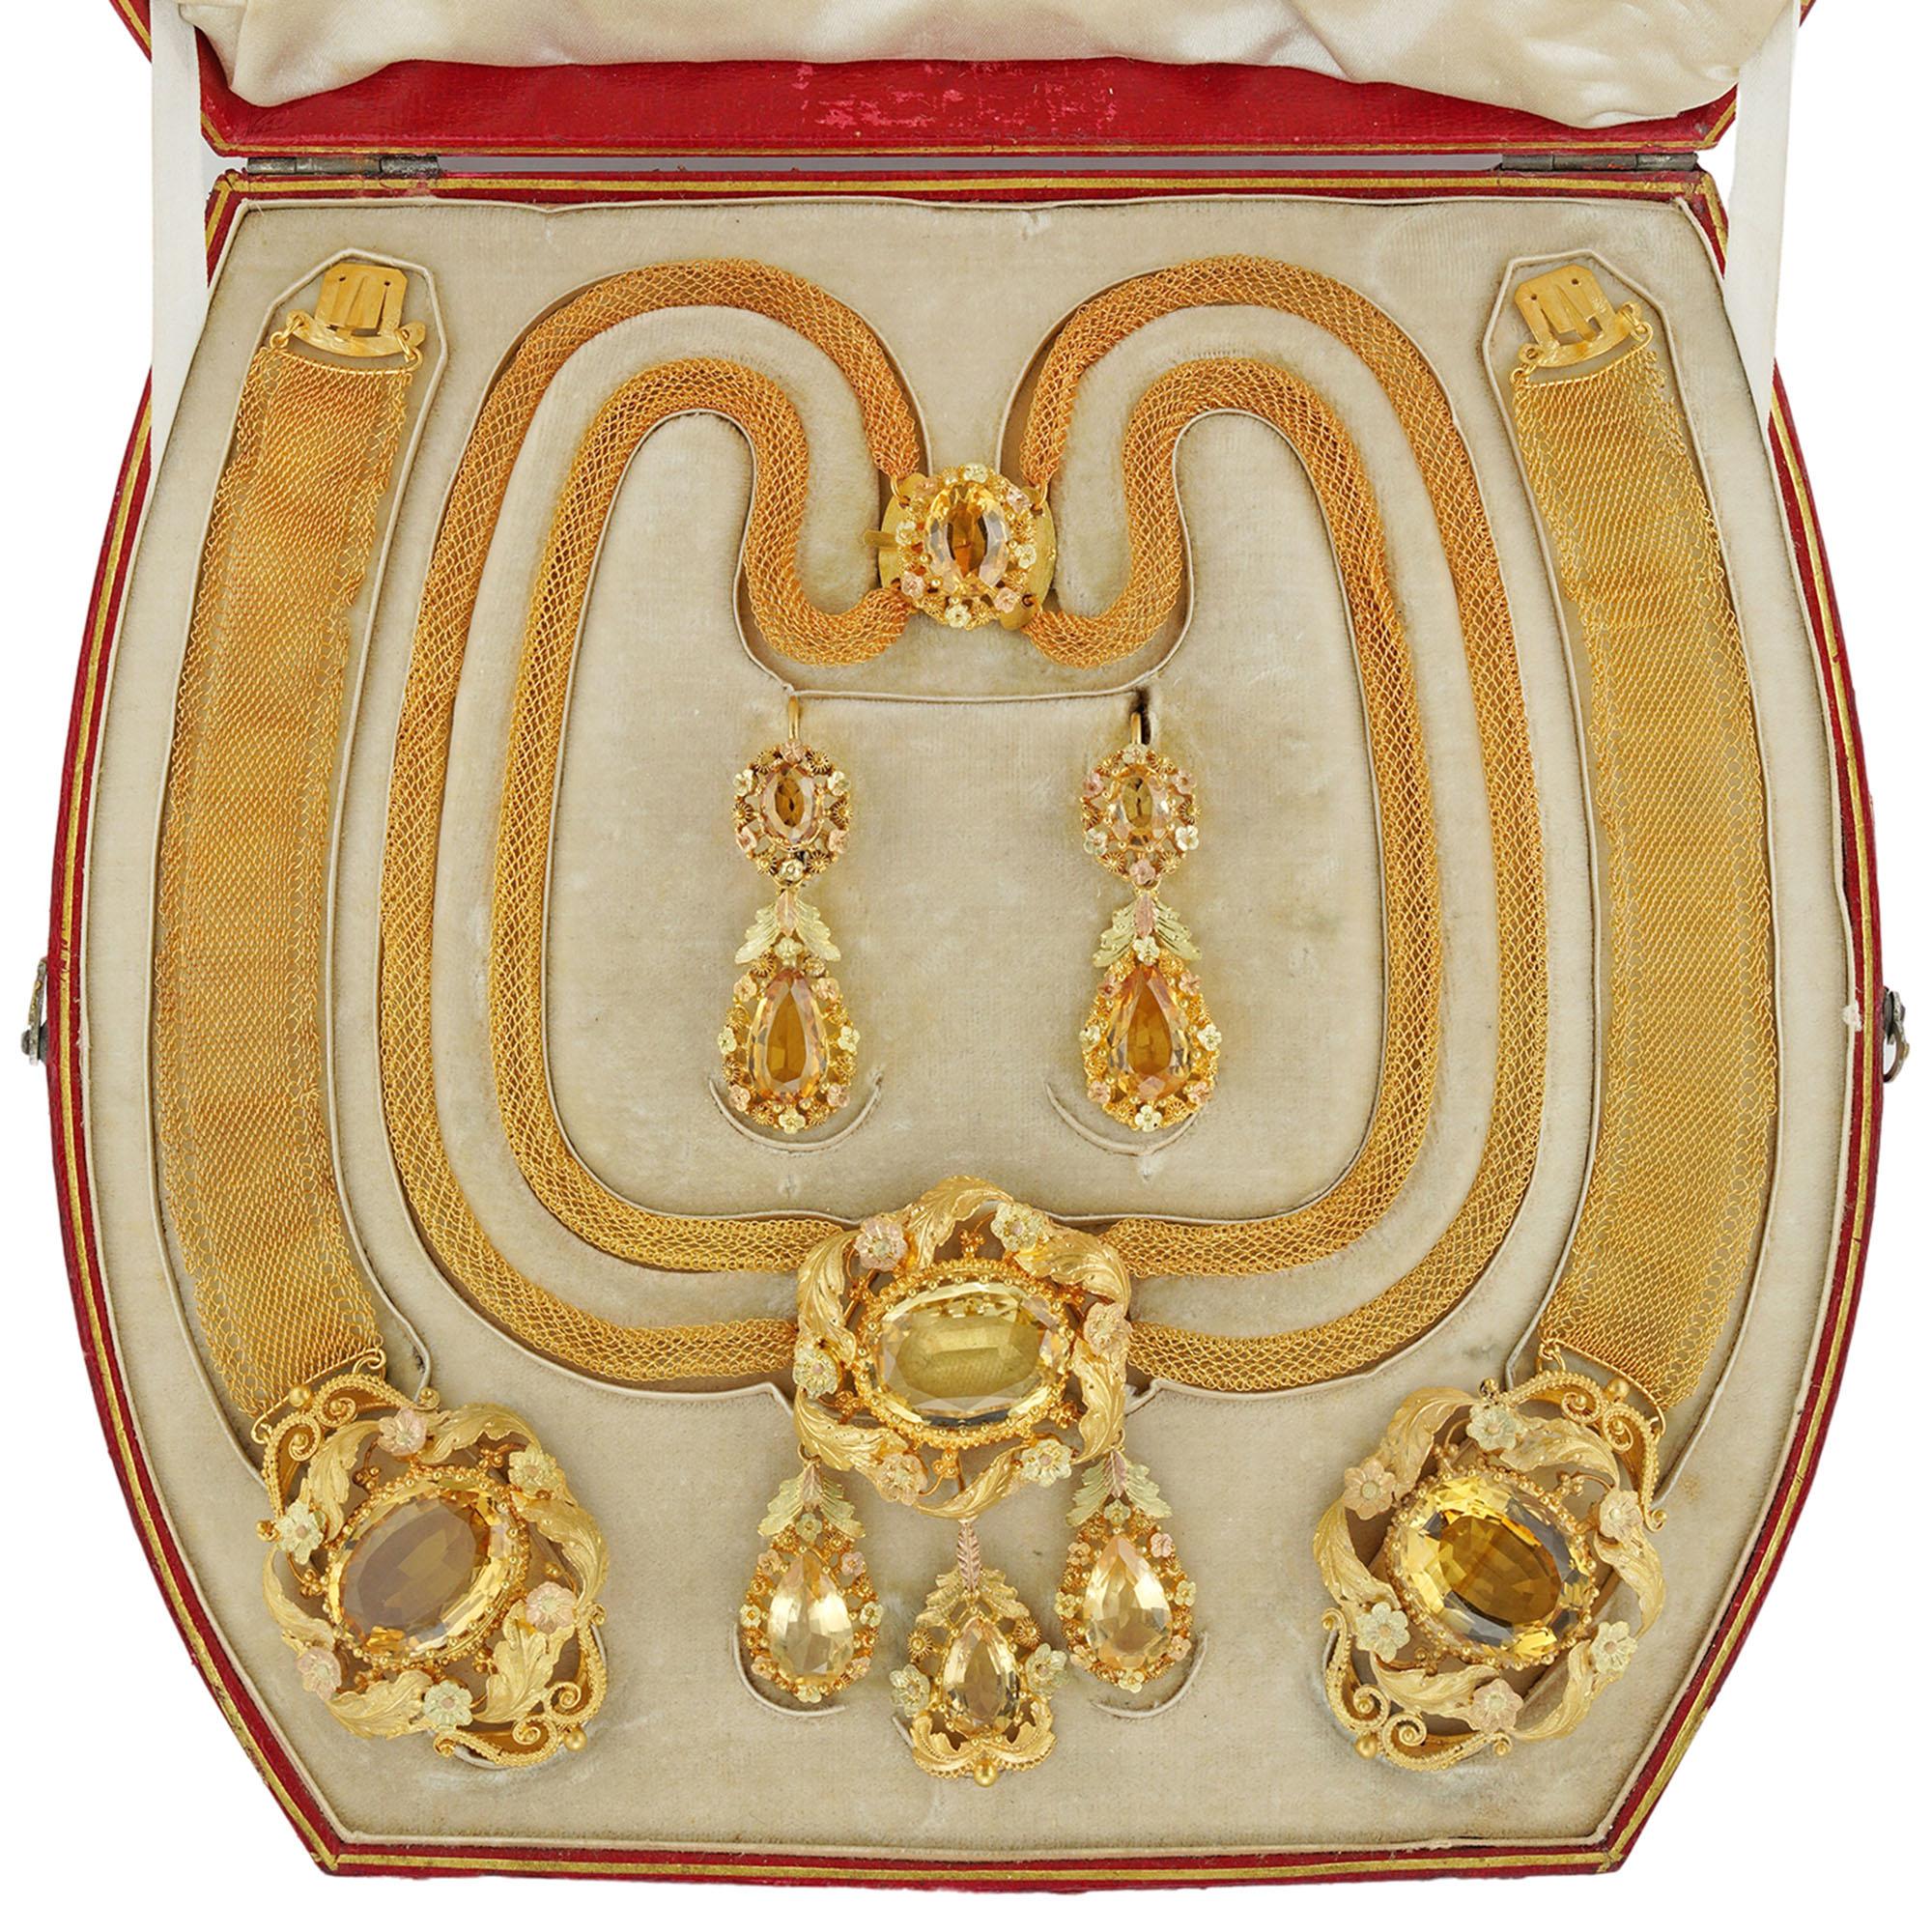 A fine Georgian citrine and gold parure, consisting of a necklace, a pair of earrings and a pair of bracelets, the necklace consisting of an oval-cut faceted citrine surrounded by a gold frame of foliate design, suspending three detachable drop-like